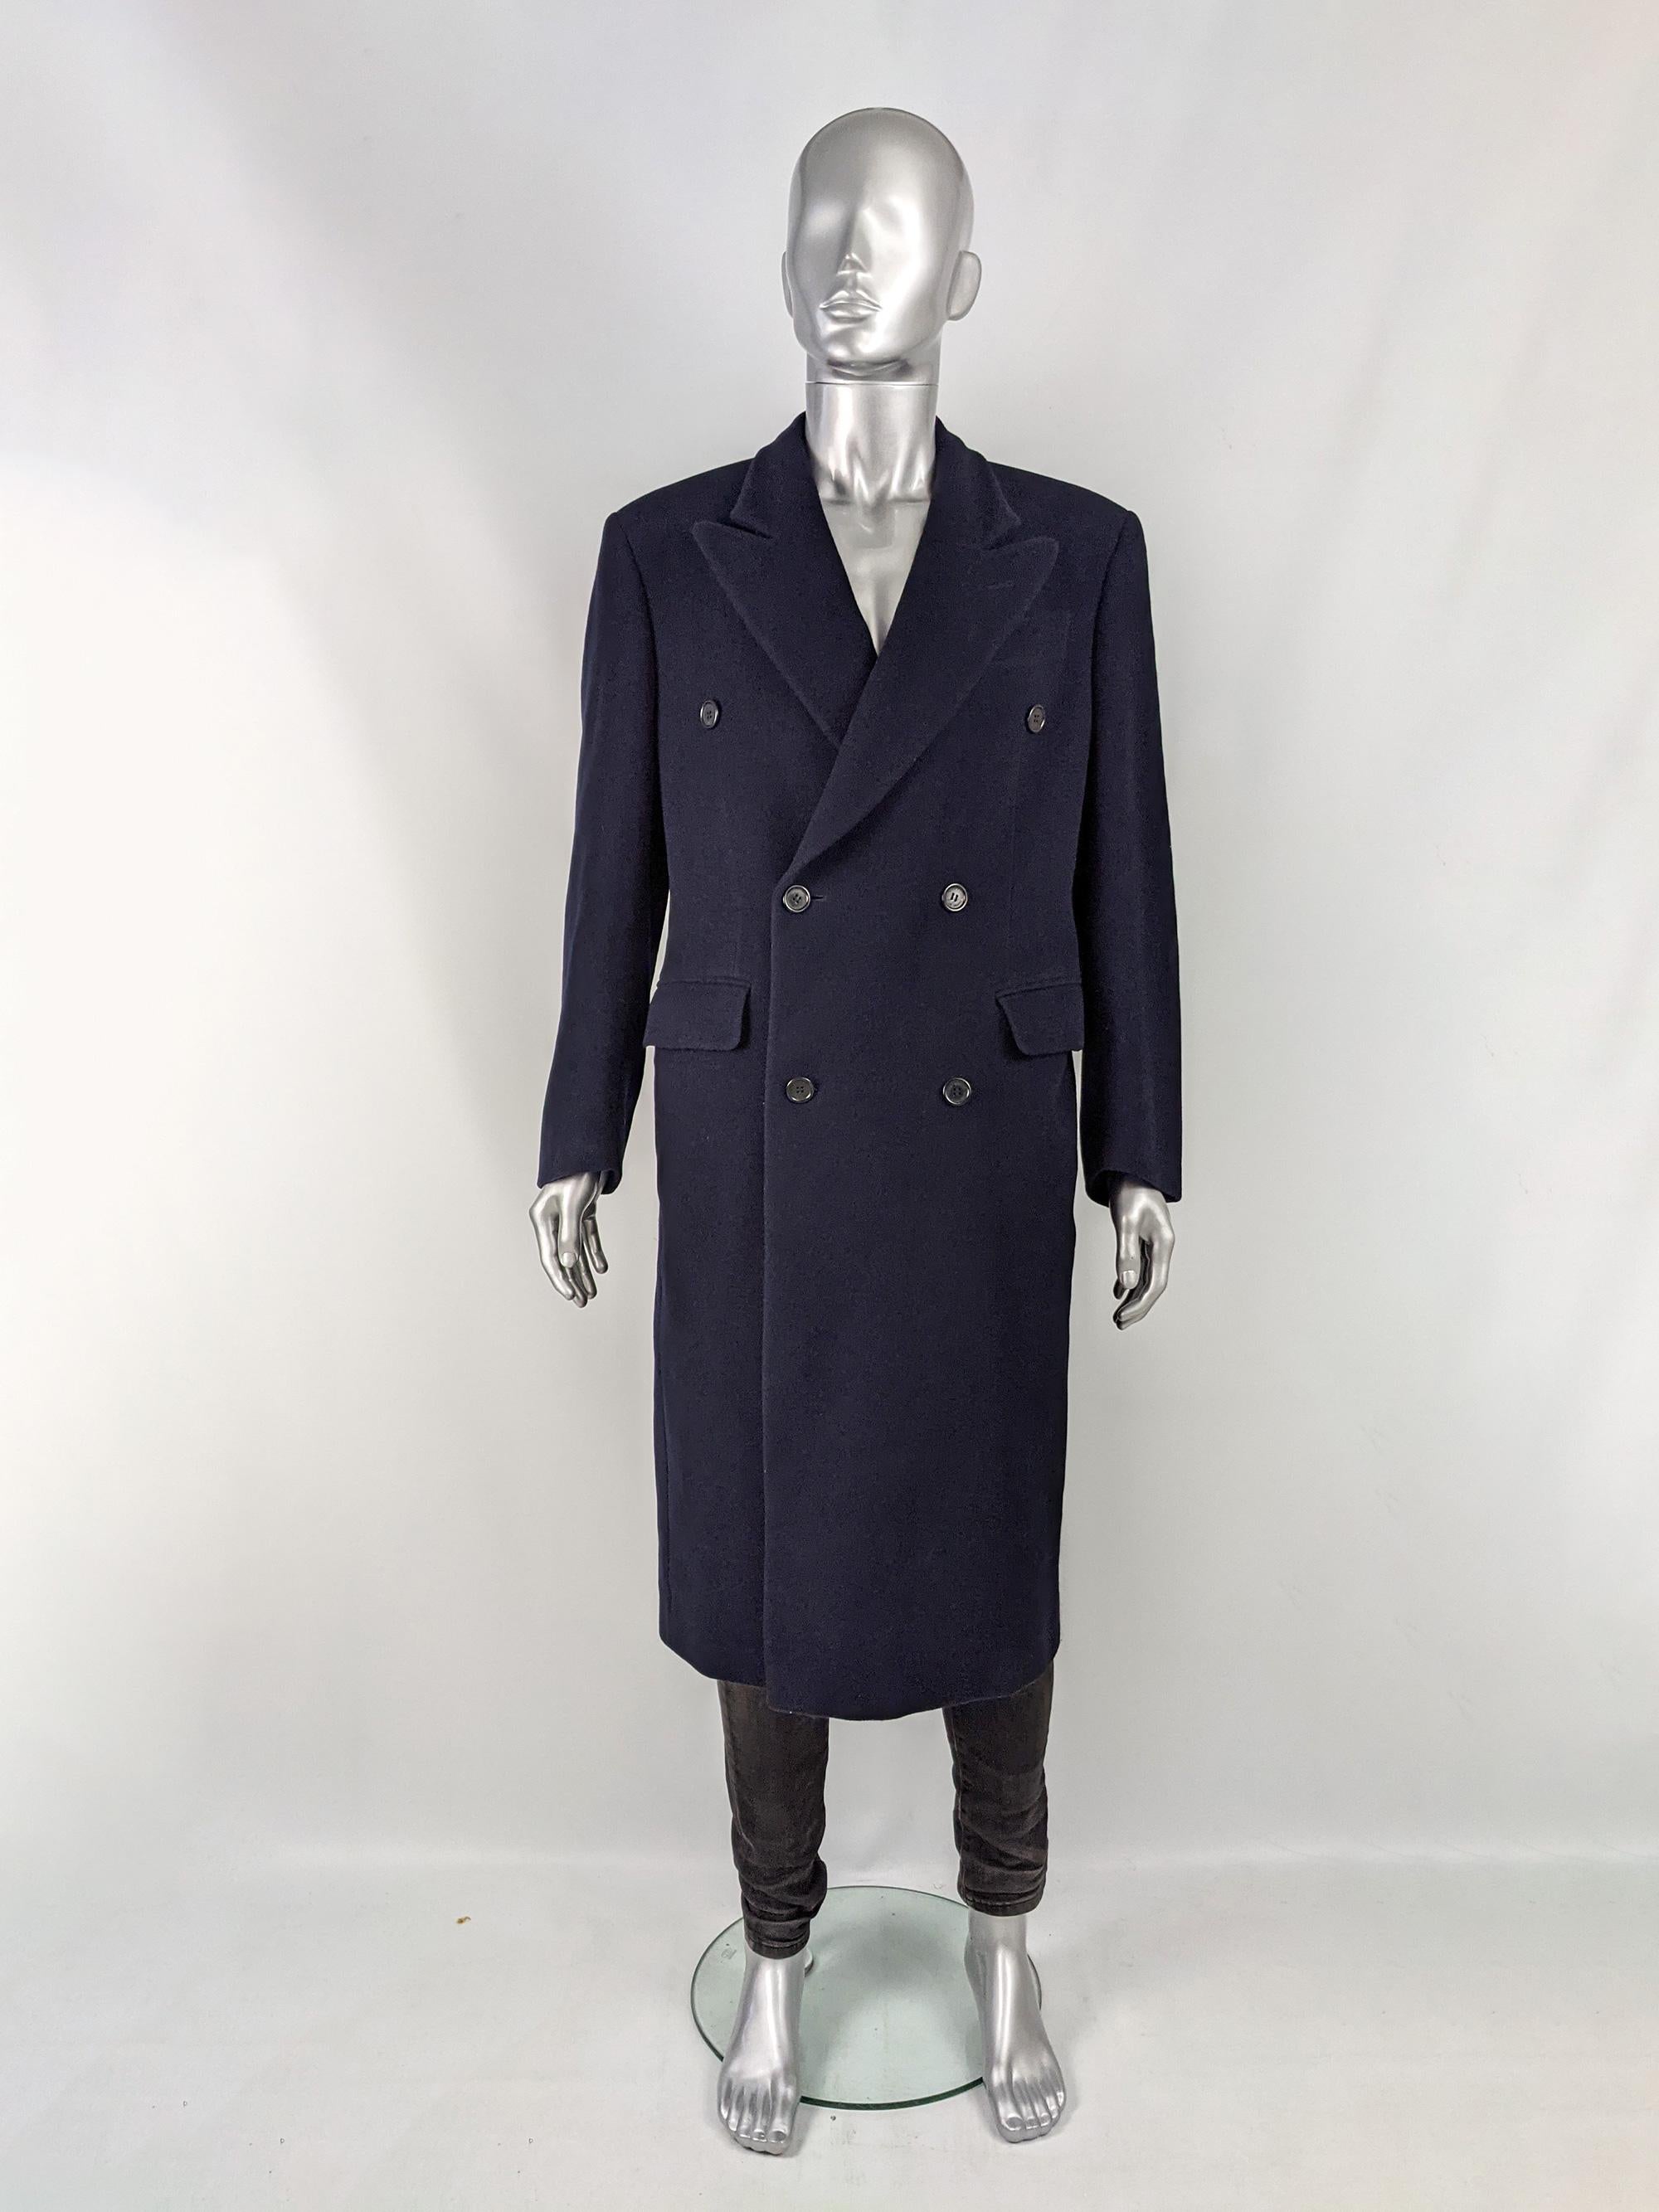 An excellent and timeless vintage mens Gianfranco Ferre peacoat. Gianfranco Ferre was the creative director of Dior in the late 80s and early 90s. Made in Italy, from a navy blue wool fabric, this classic coat has double breasted buttons and peaked